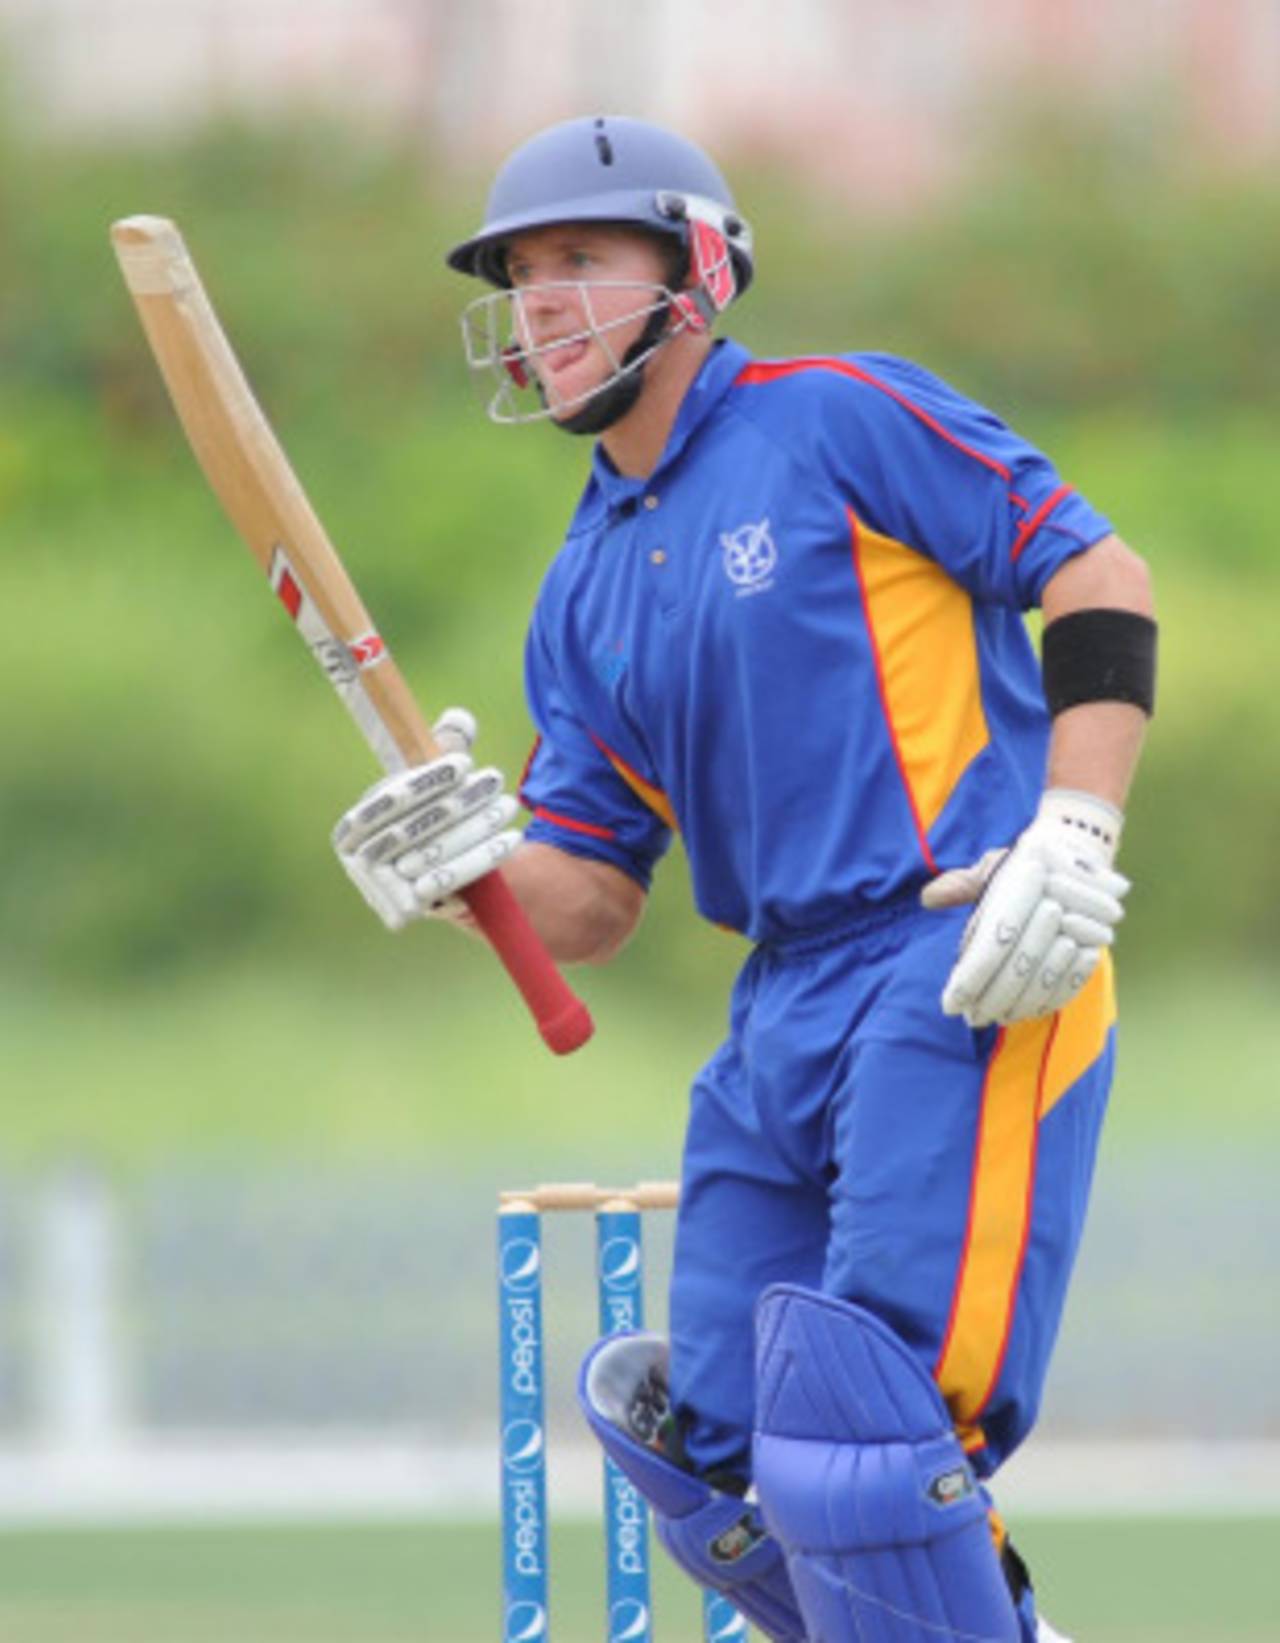 Craig Williams powered Namibia to an easy win, scoring 73 off 35 balls in pursuit of just 93&nbsp;&nbsp;&bull;&nbsp;&nbsp;International Cricket Council